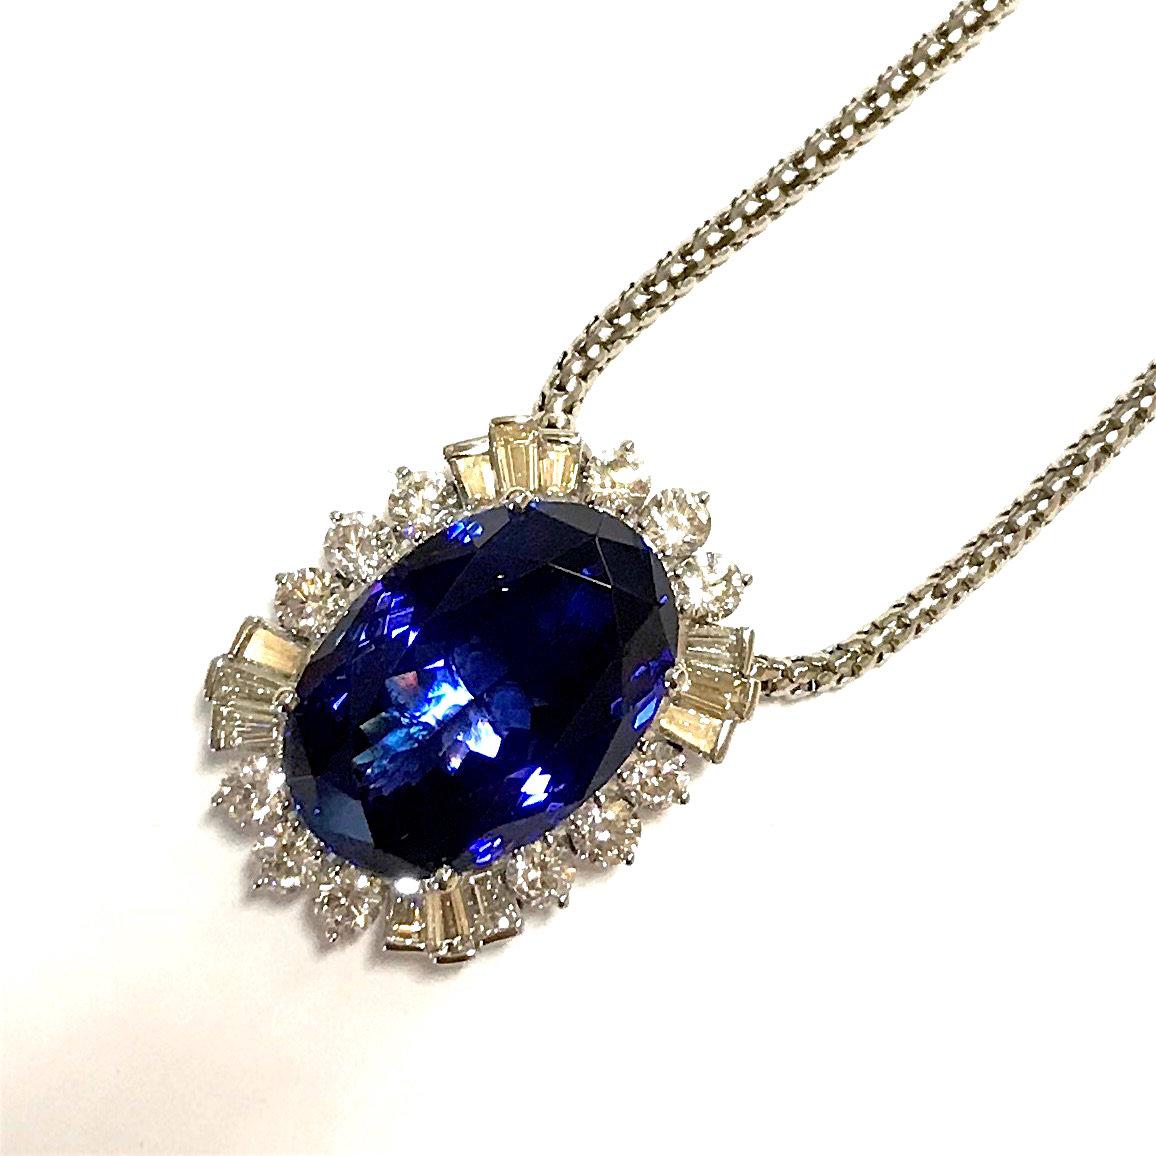 Contemporary 36.86 Carat Oval Tanzanite and White Diamond and Baguette Necklace